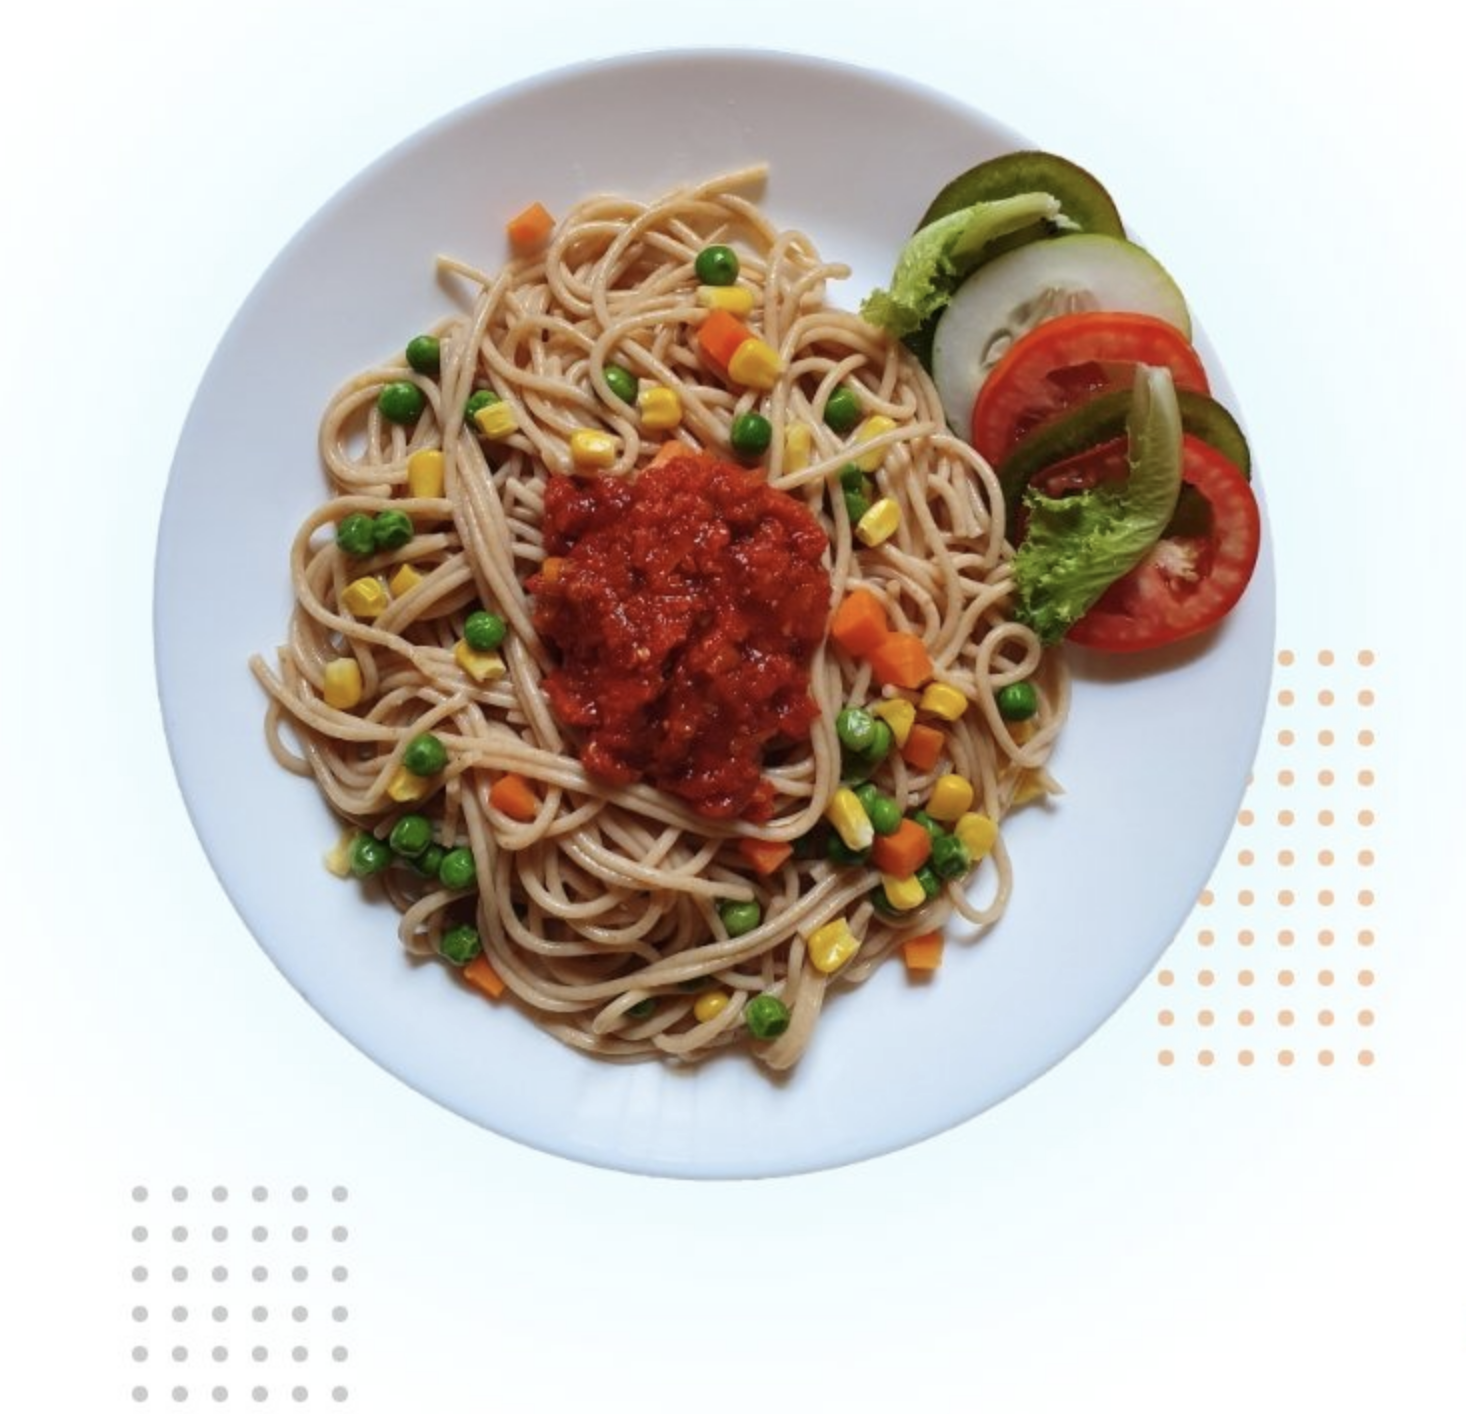 Pasta plate with vegatables